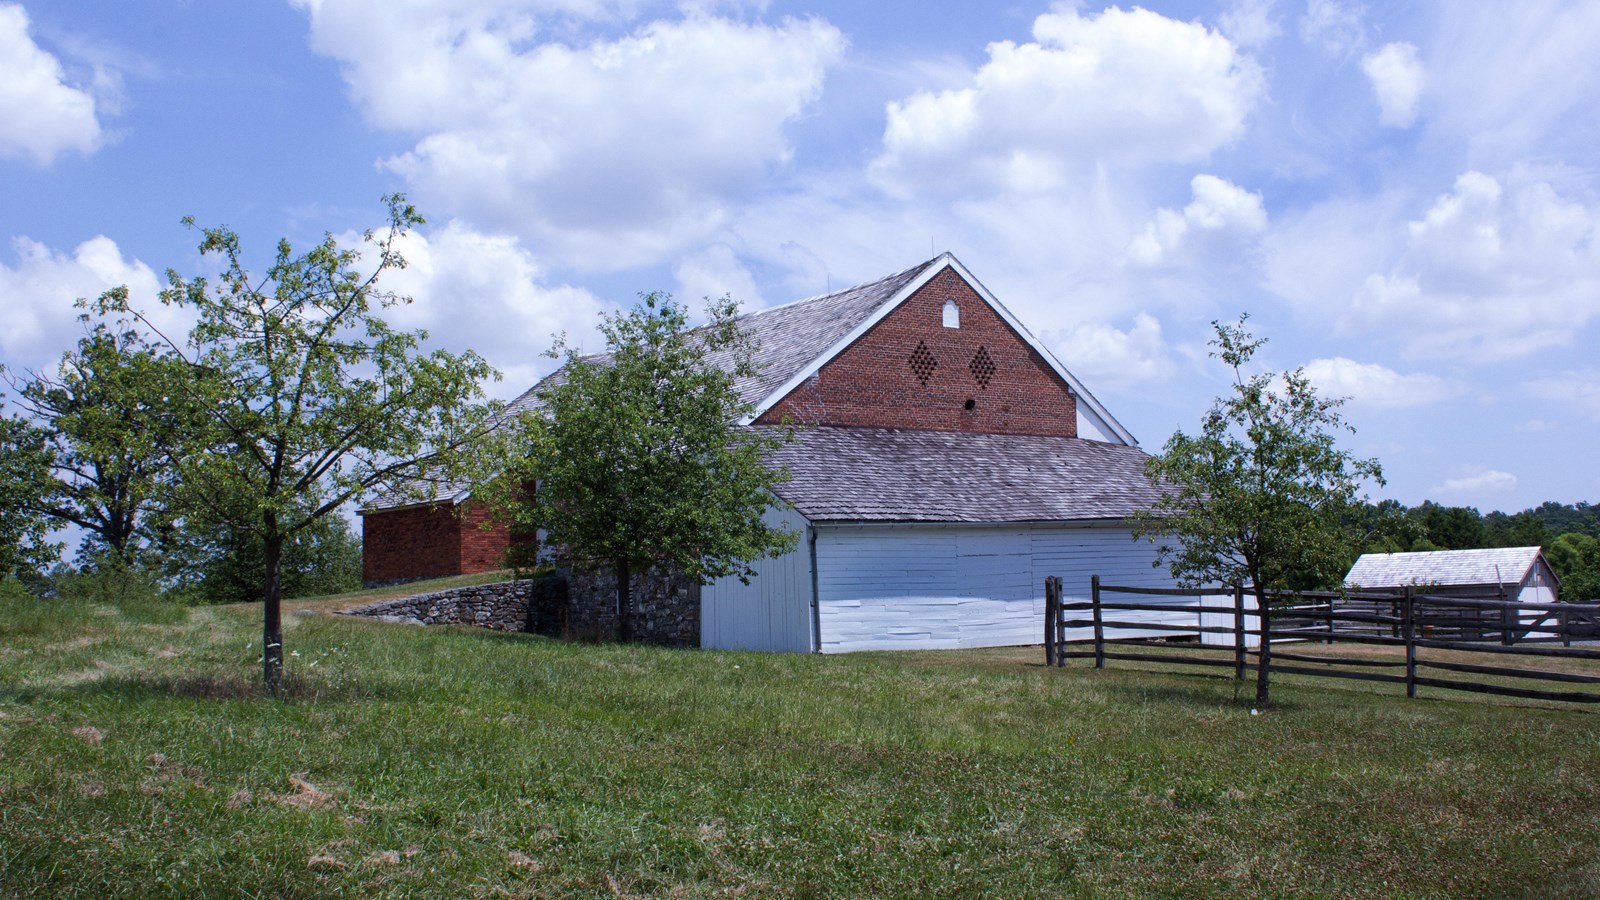 A brick bank barn with a hole near the roof caused by a shell